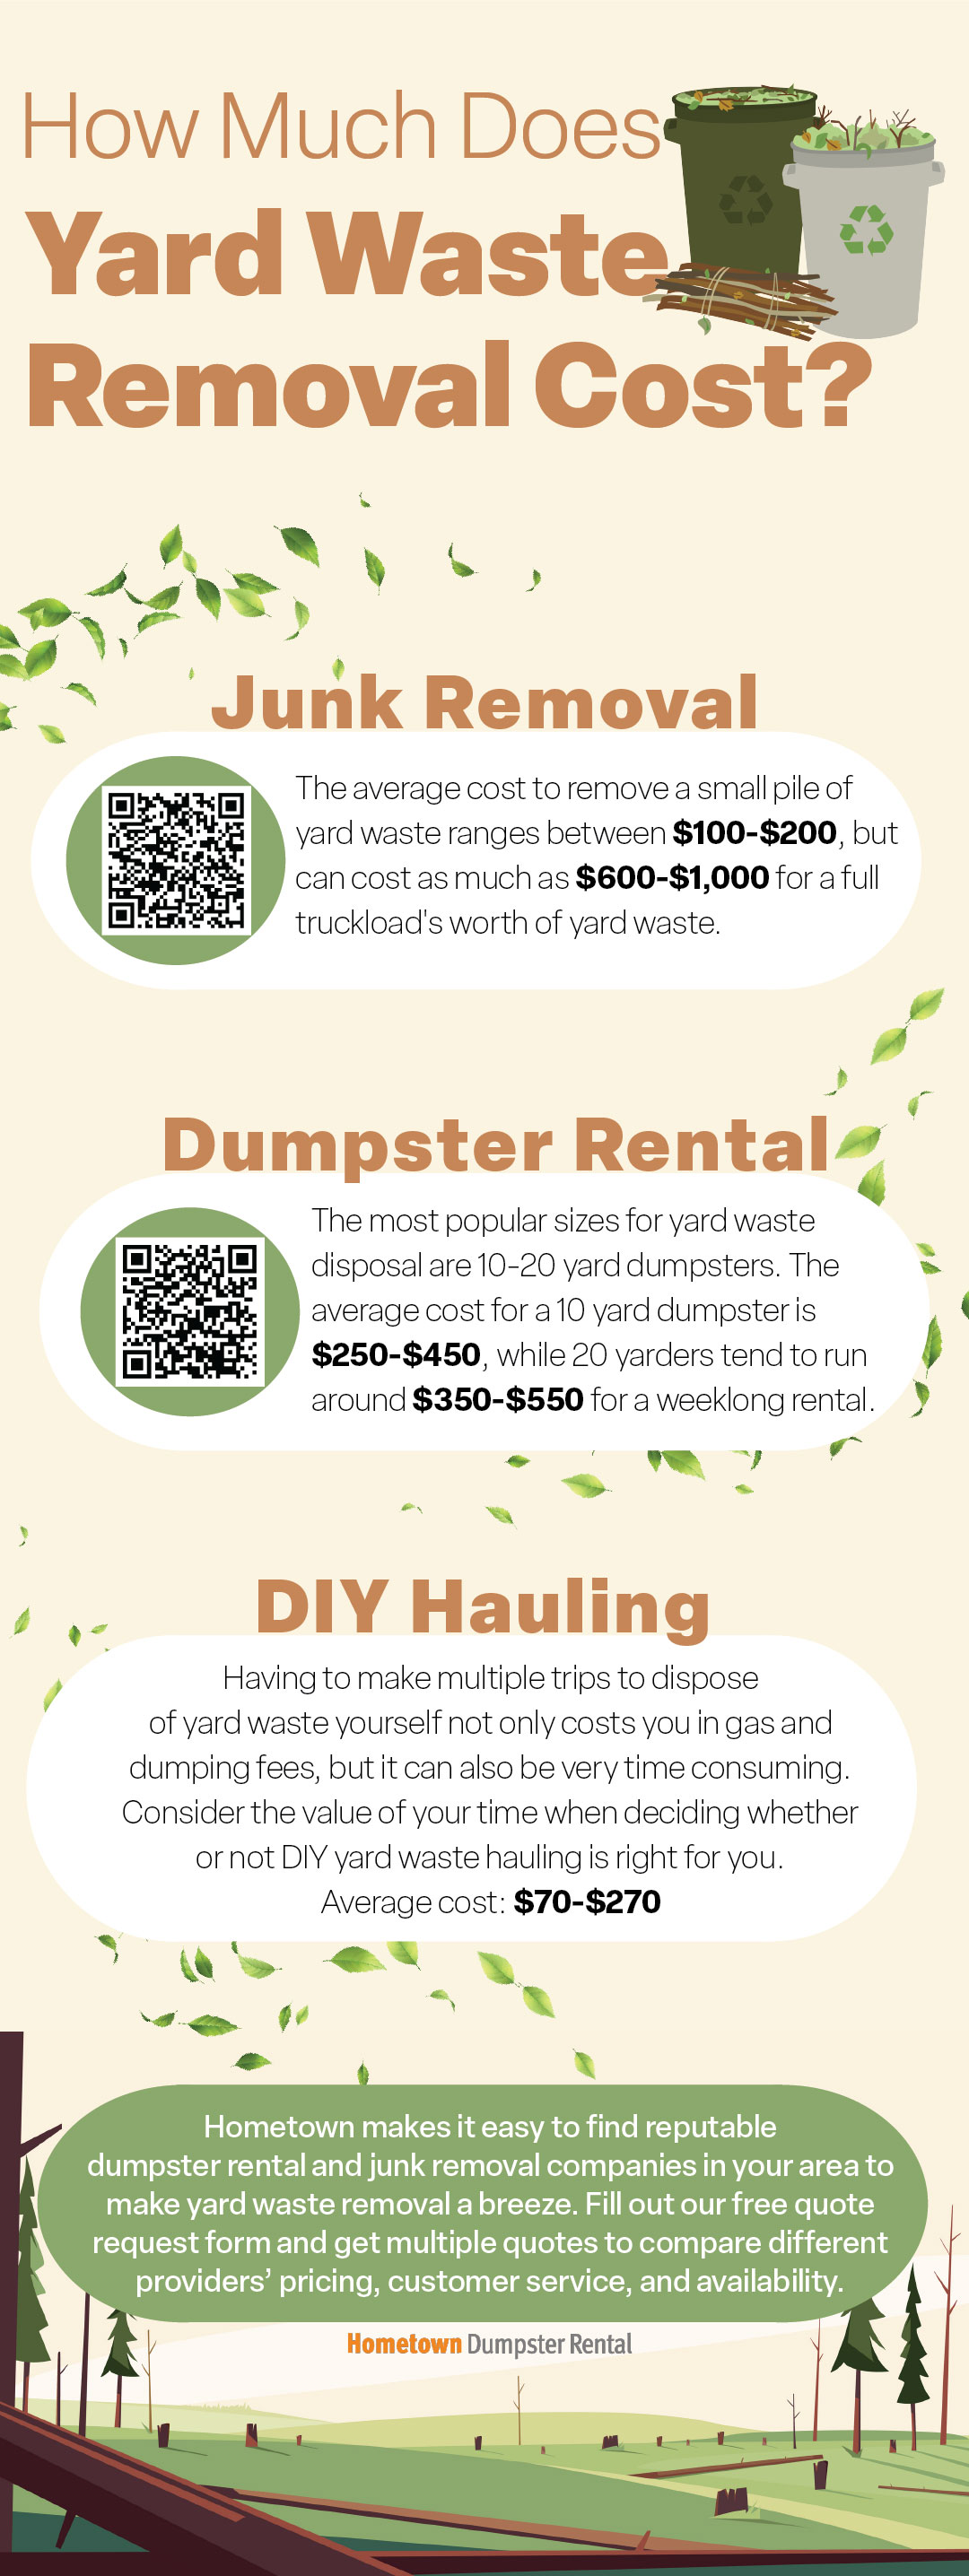 How Much Does Yard Waste Removal Cost Infographic